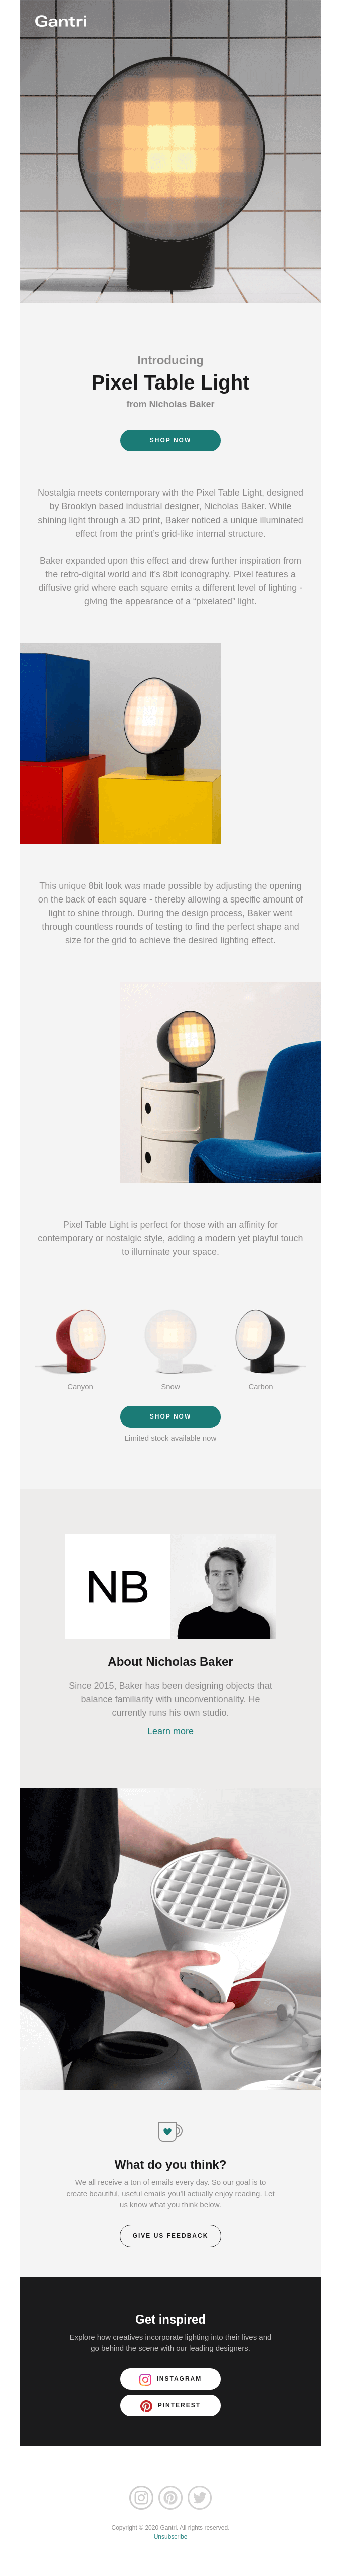 Introducing Pixel Table Light from Nicholas Baker